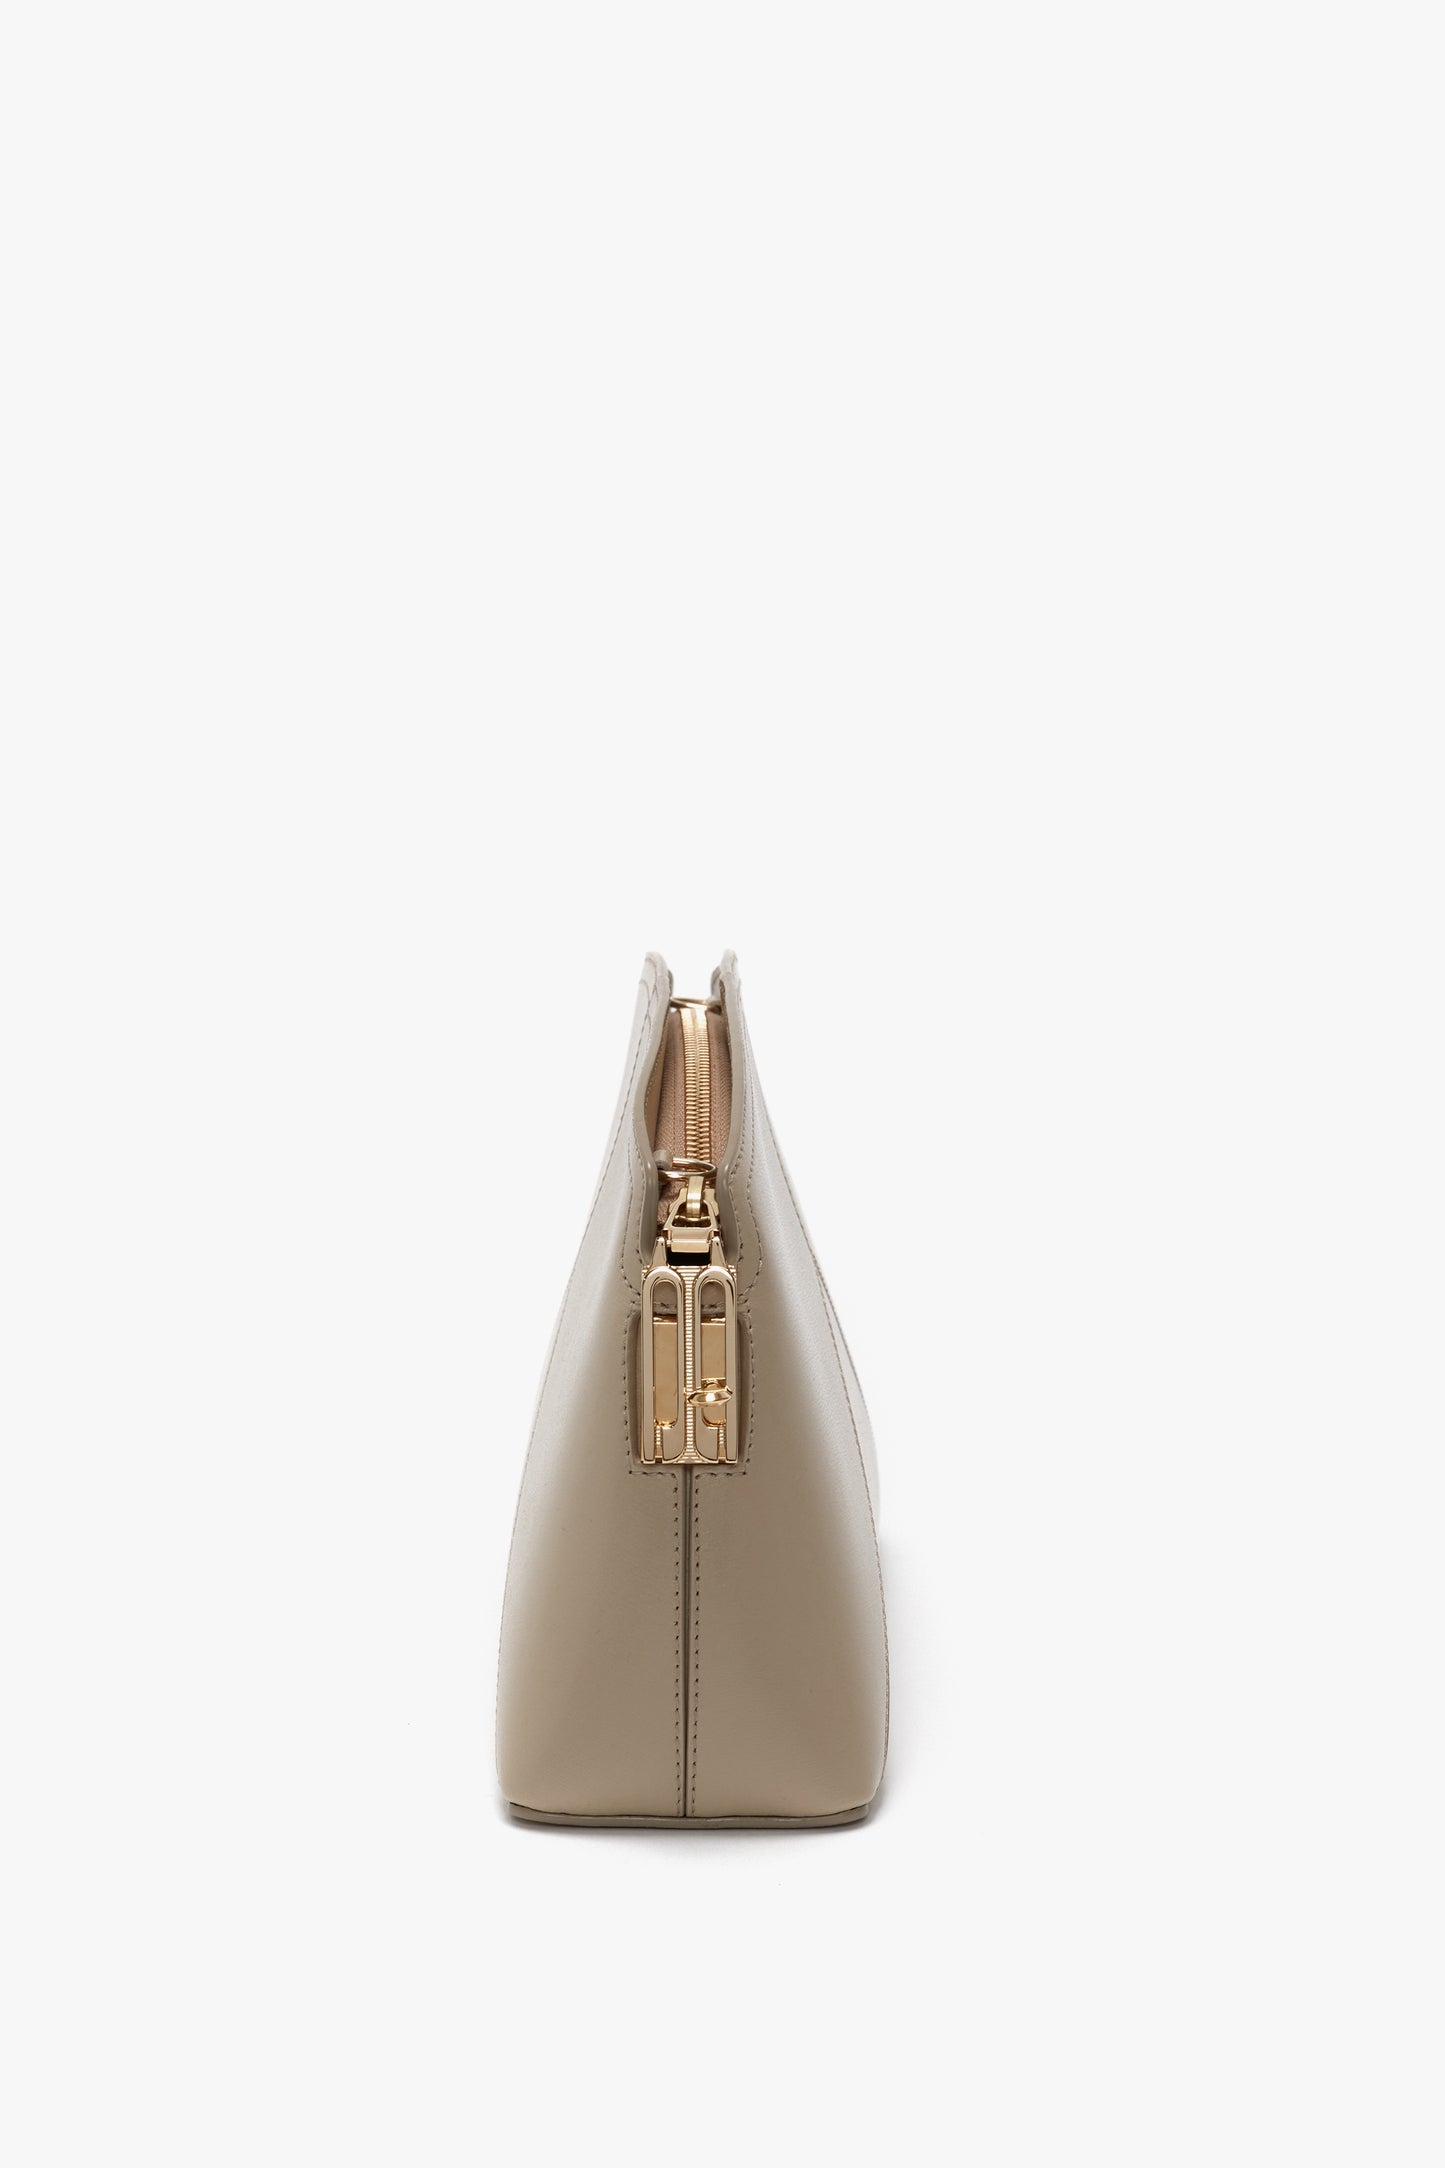 Side view of a Victoria Beckham Victoria Crossbody Bag In Taupe Leather with gold hardware against a white background.